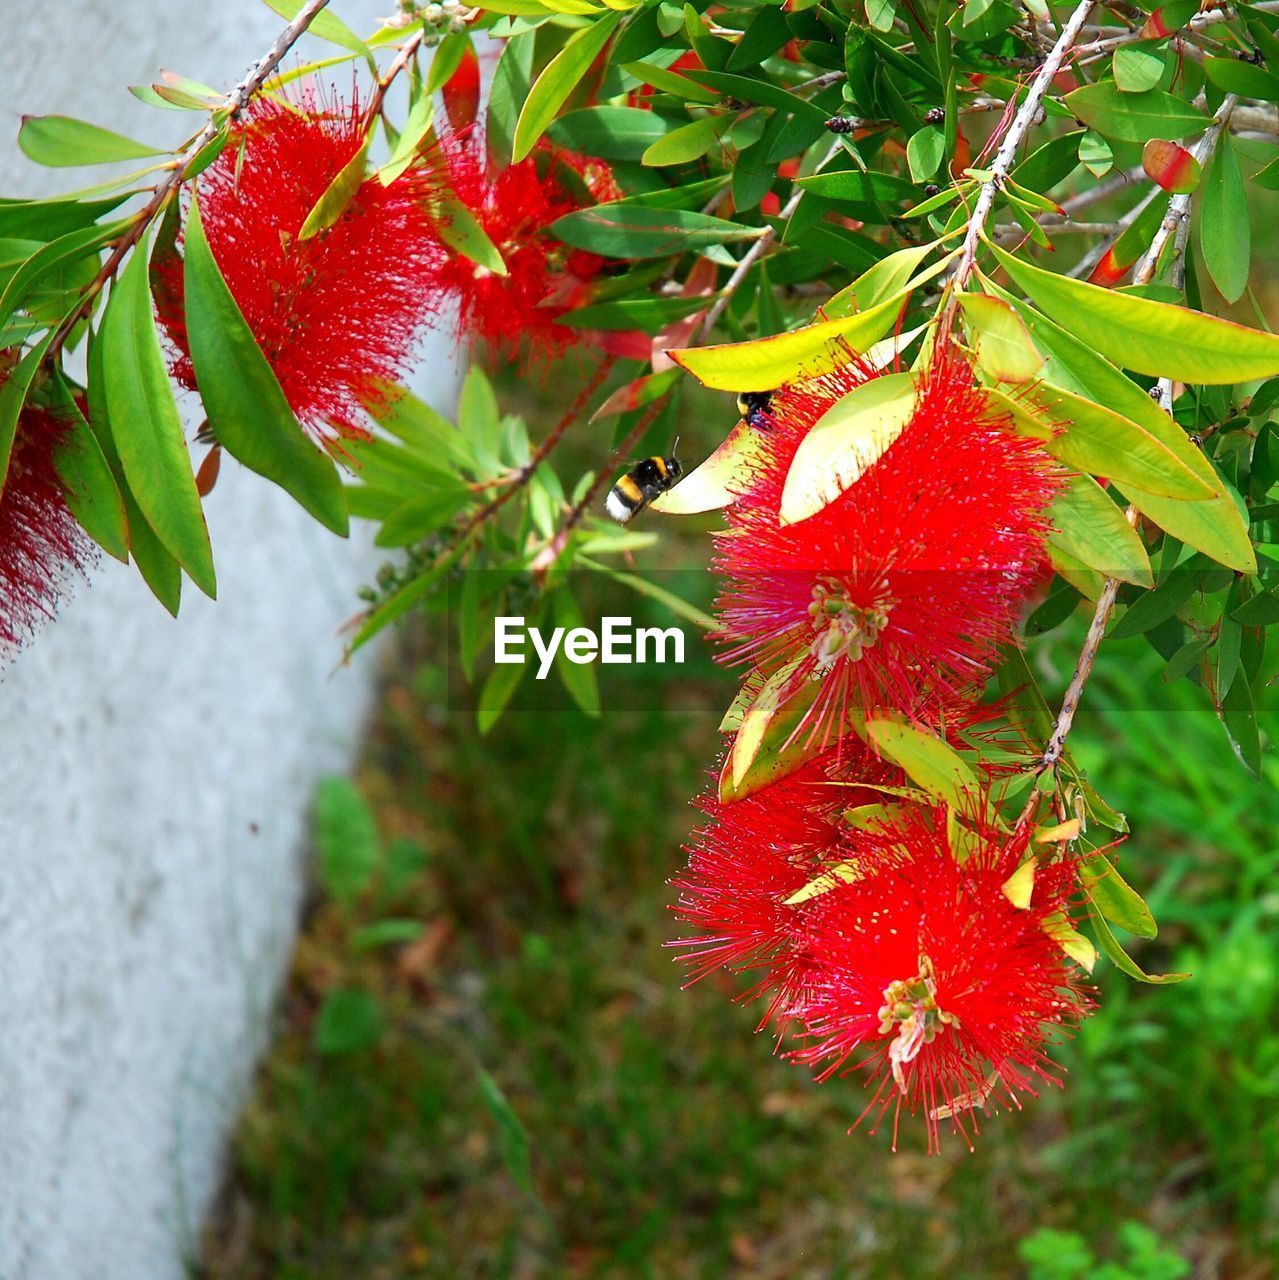 CLOSE-UP OF RED LEAVES ON TREE